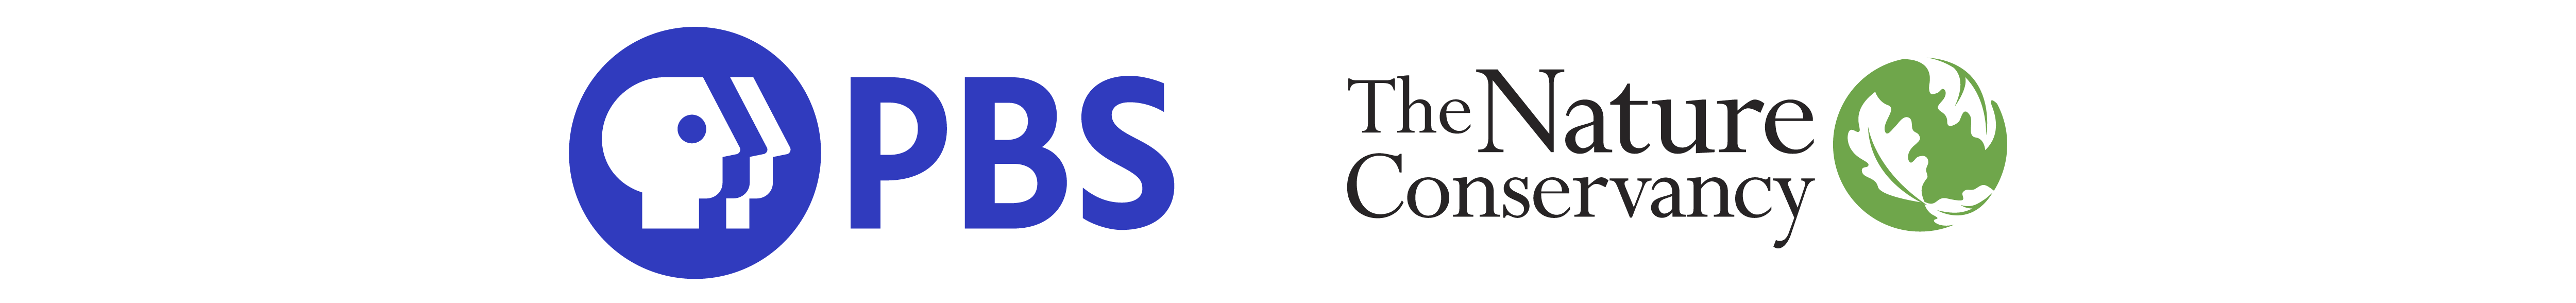 two logos, a blue PBS logo on the left and The Nature Conservancy logo on the right